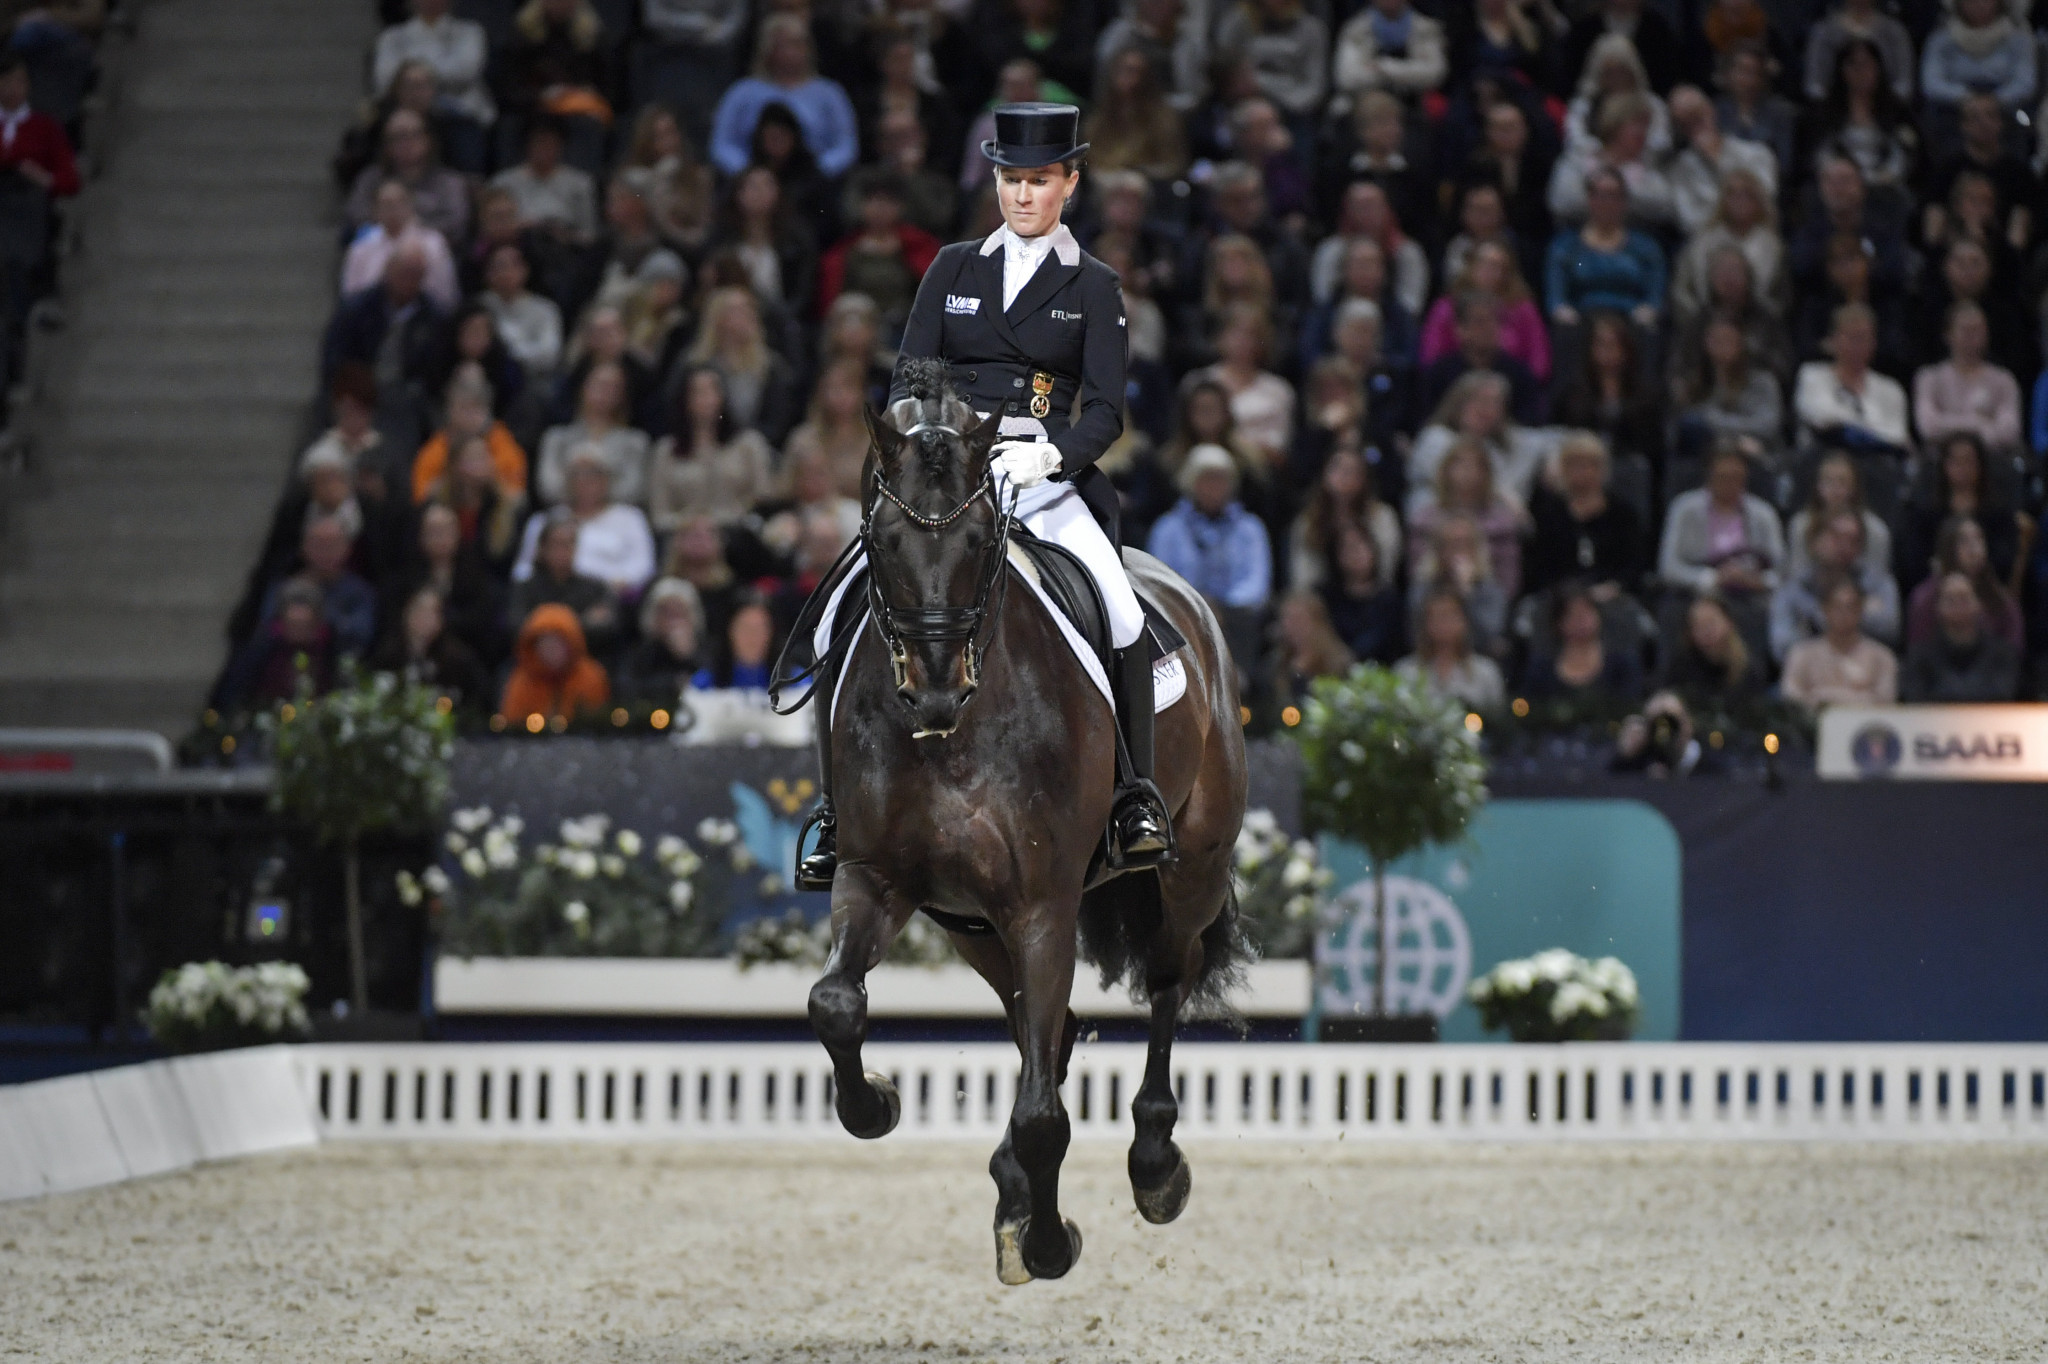 Germany’s Helen Langehanenberg, the FEI 2013 World Cup champion, is the highest-ranked rider in Herning ©Getty Images